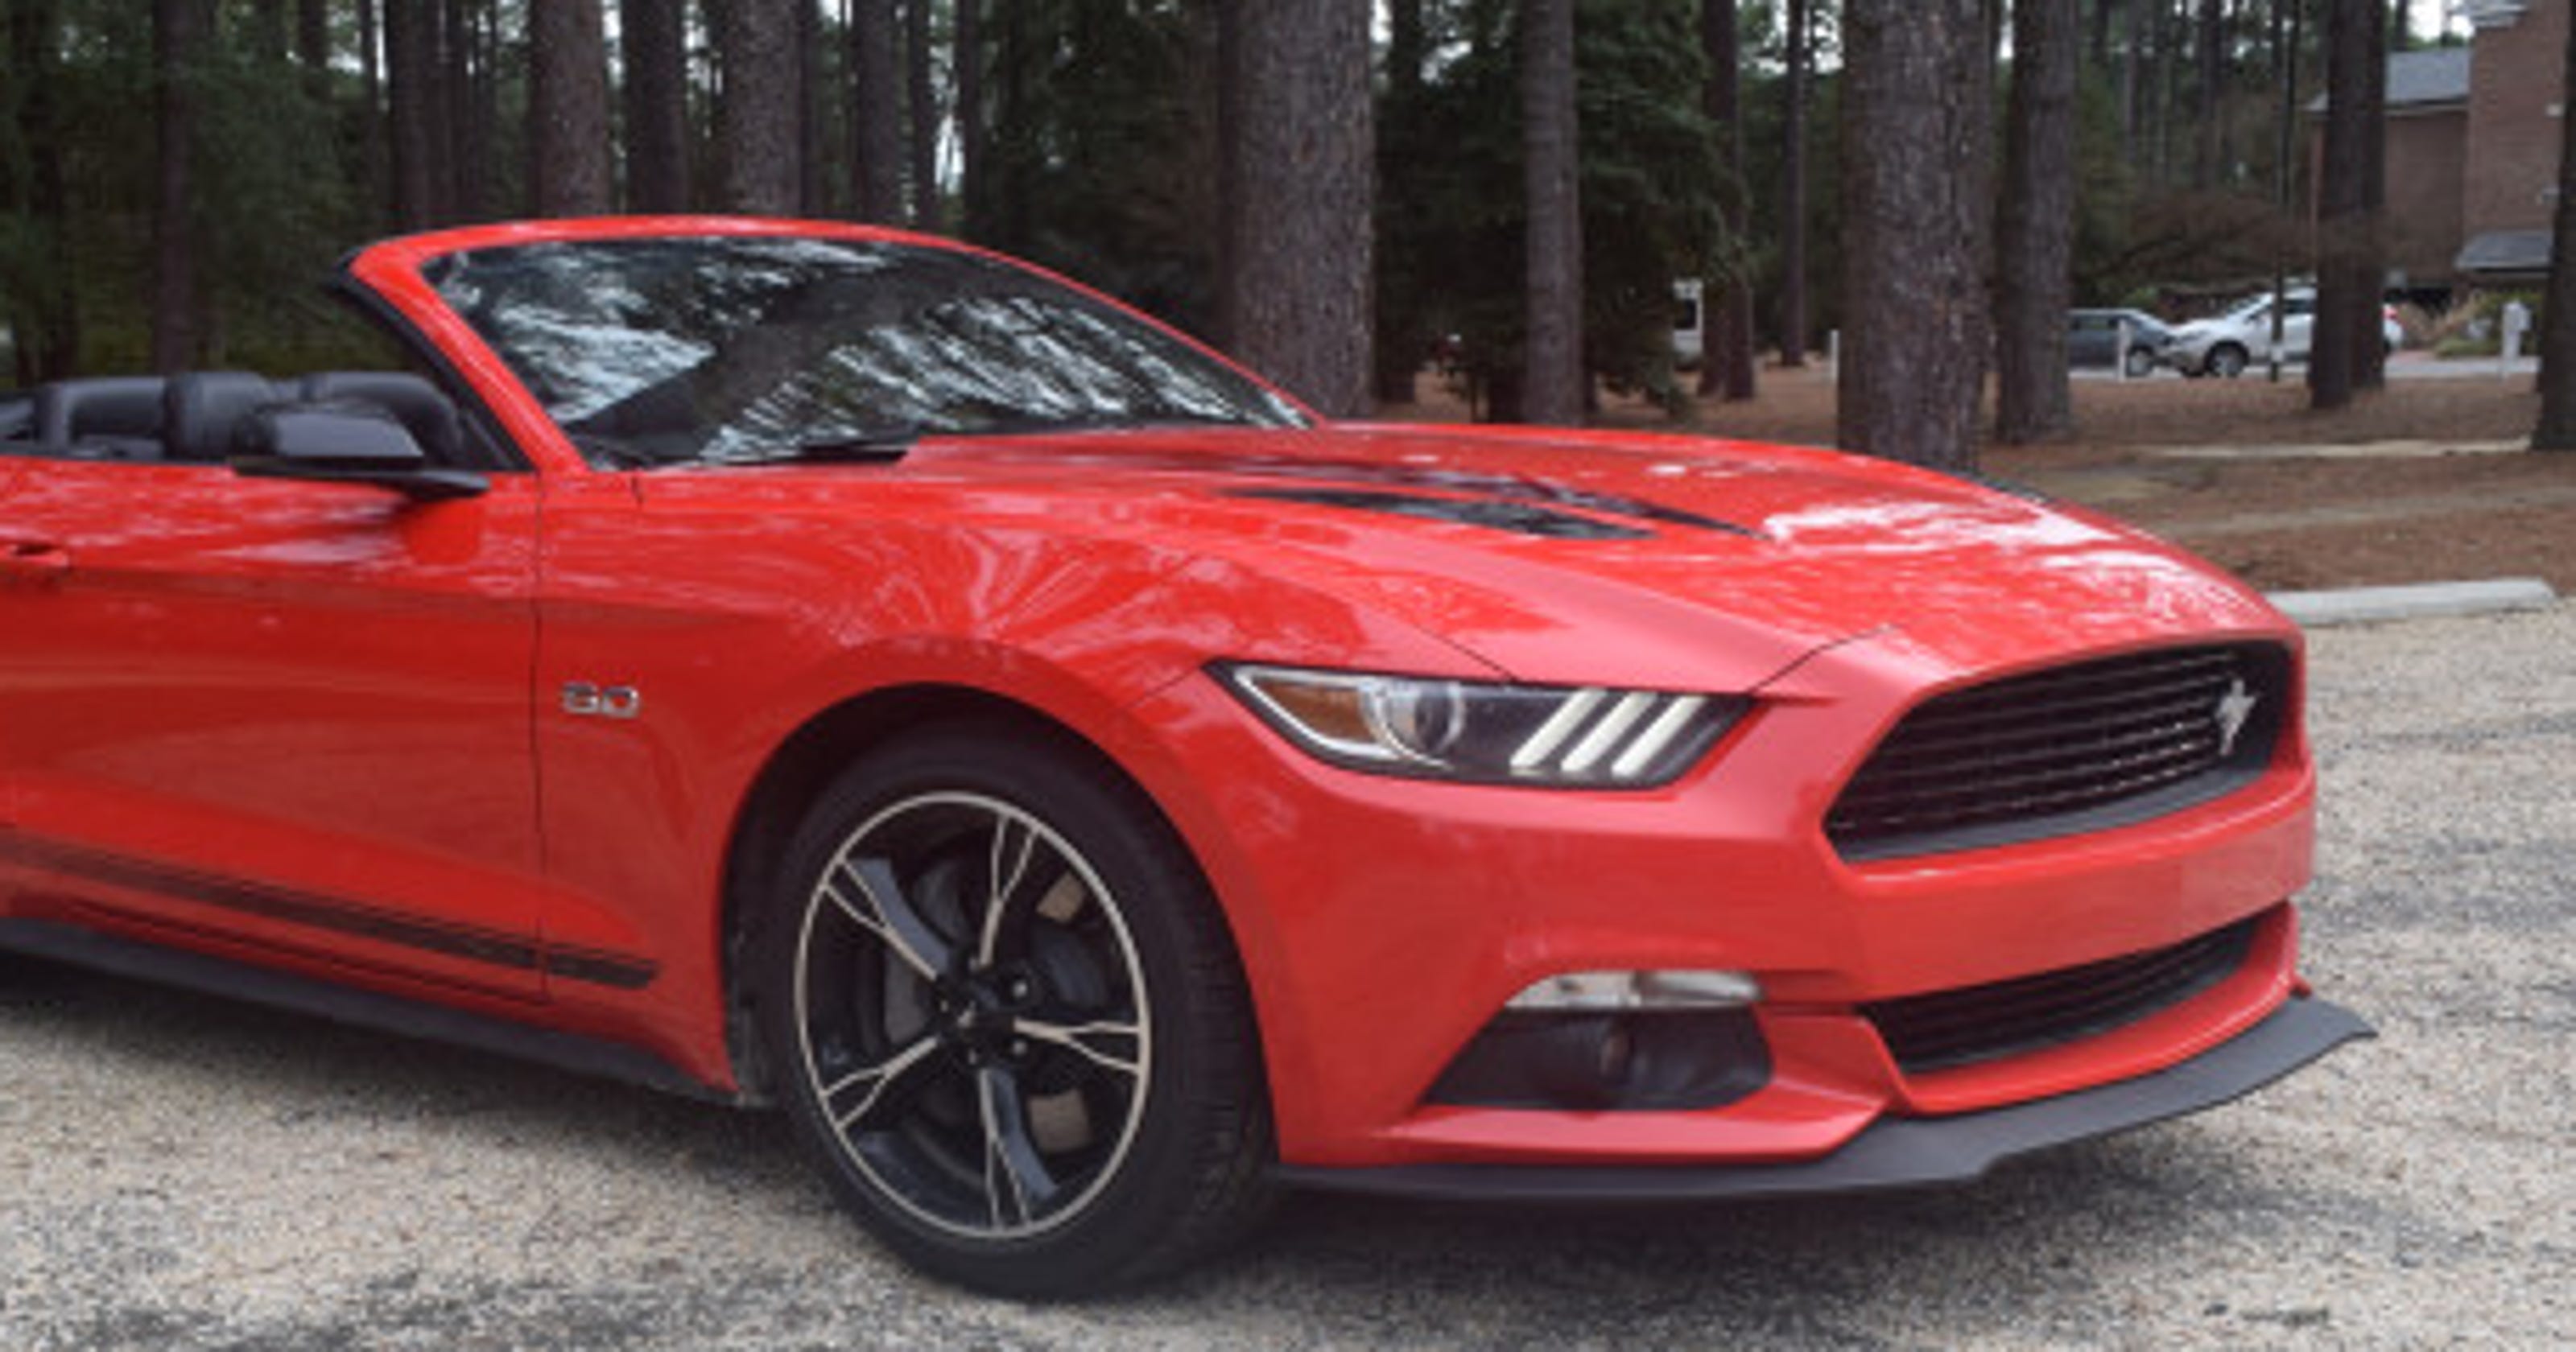 2016 mustang gt convertible review